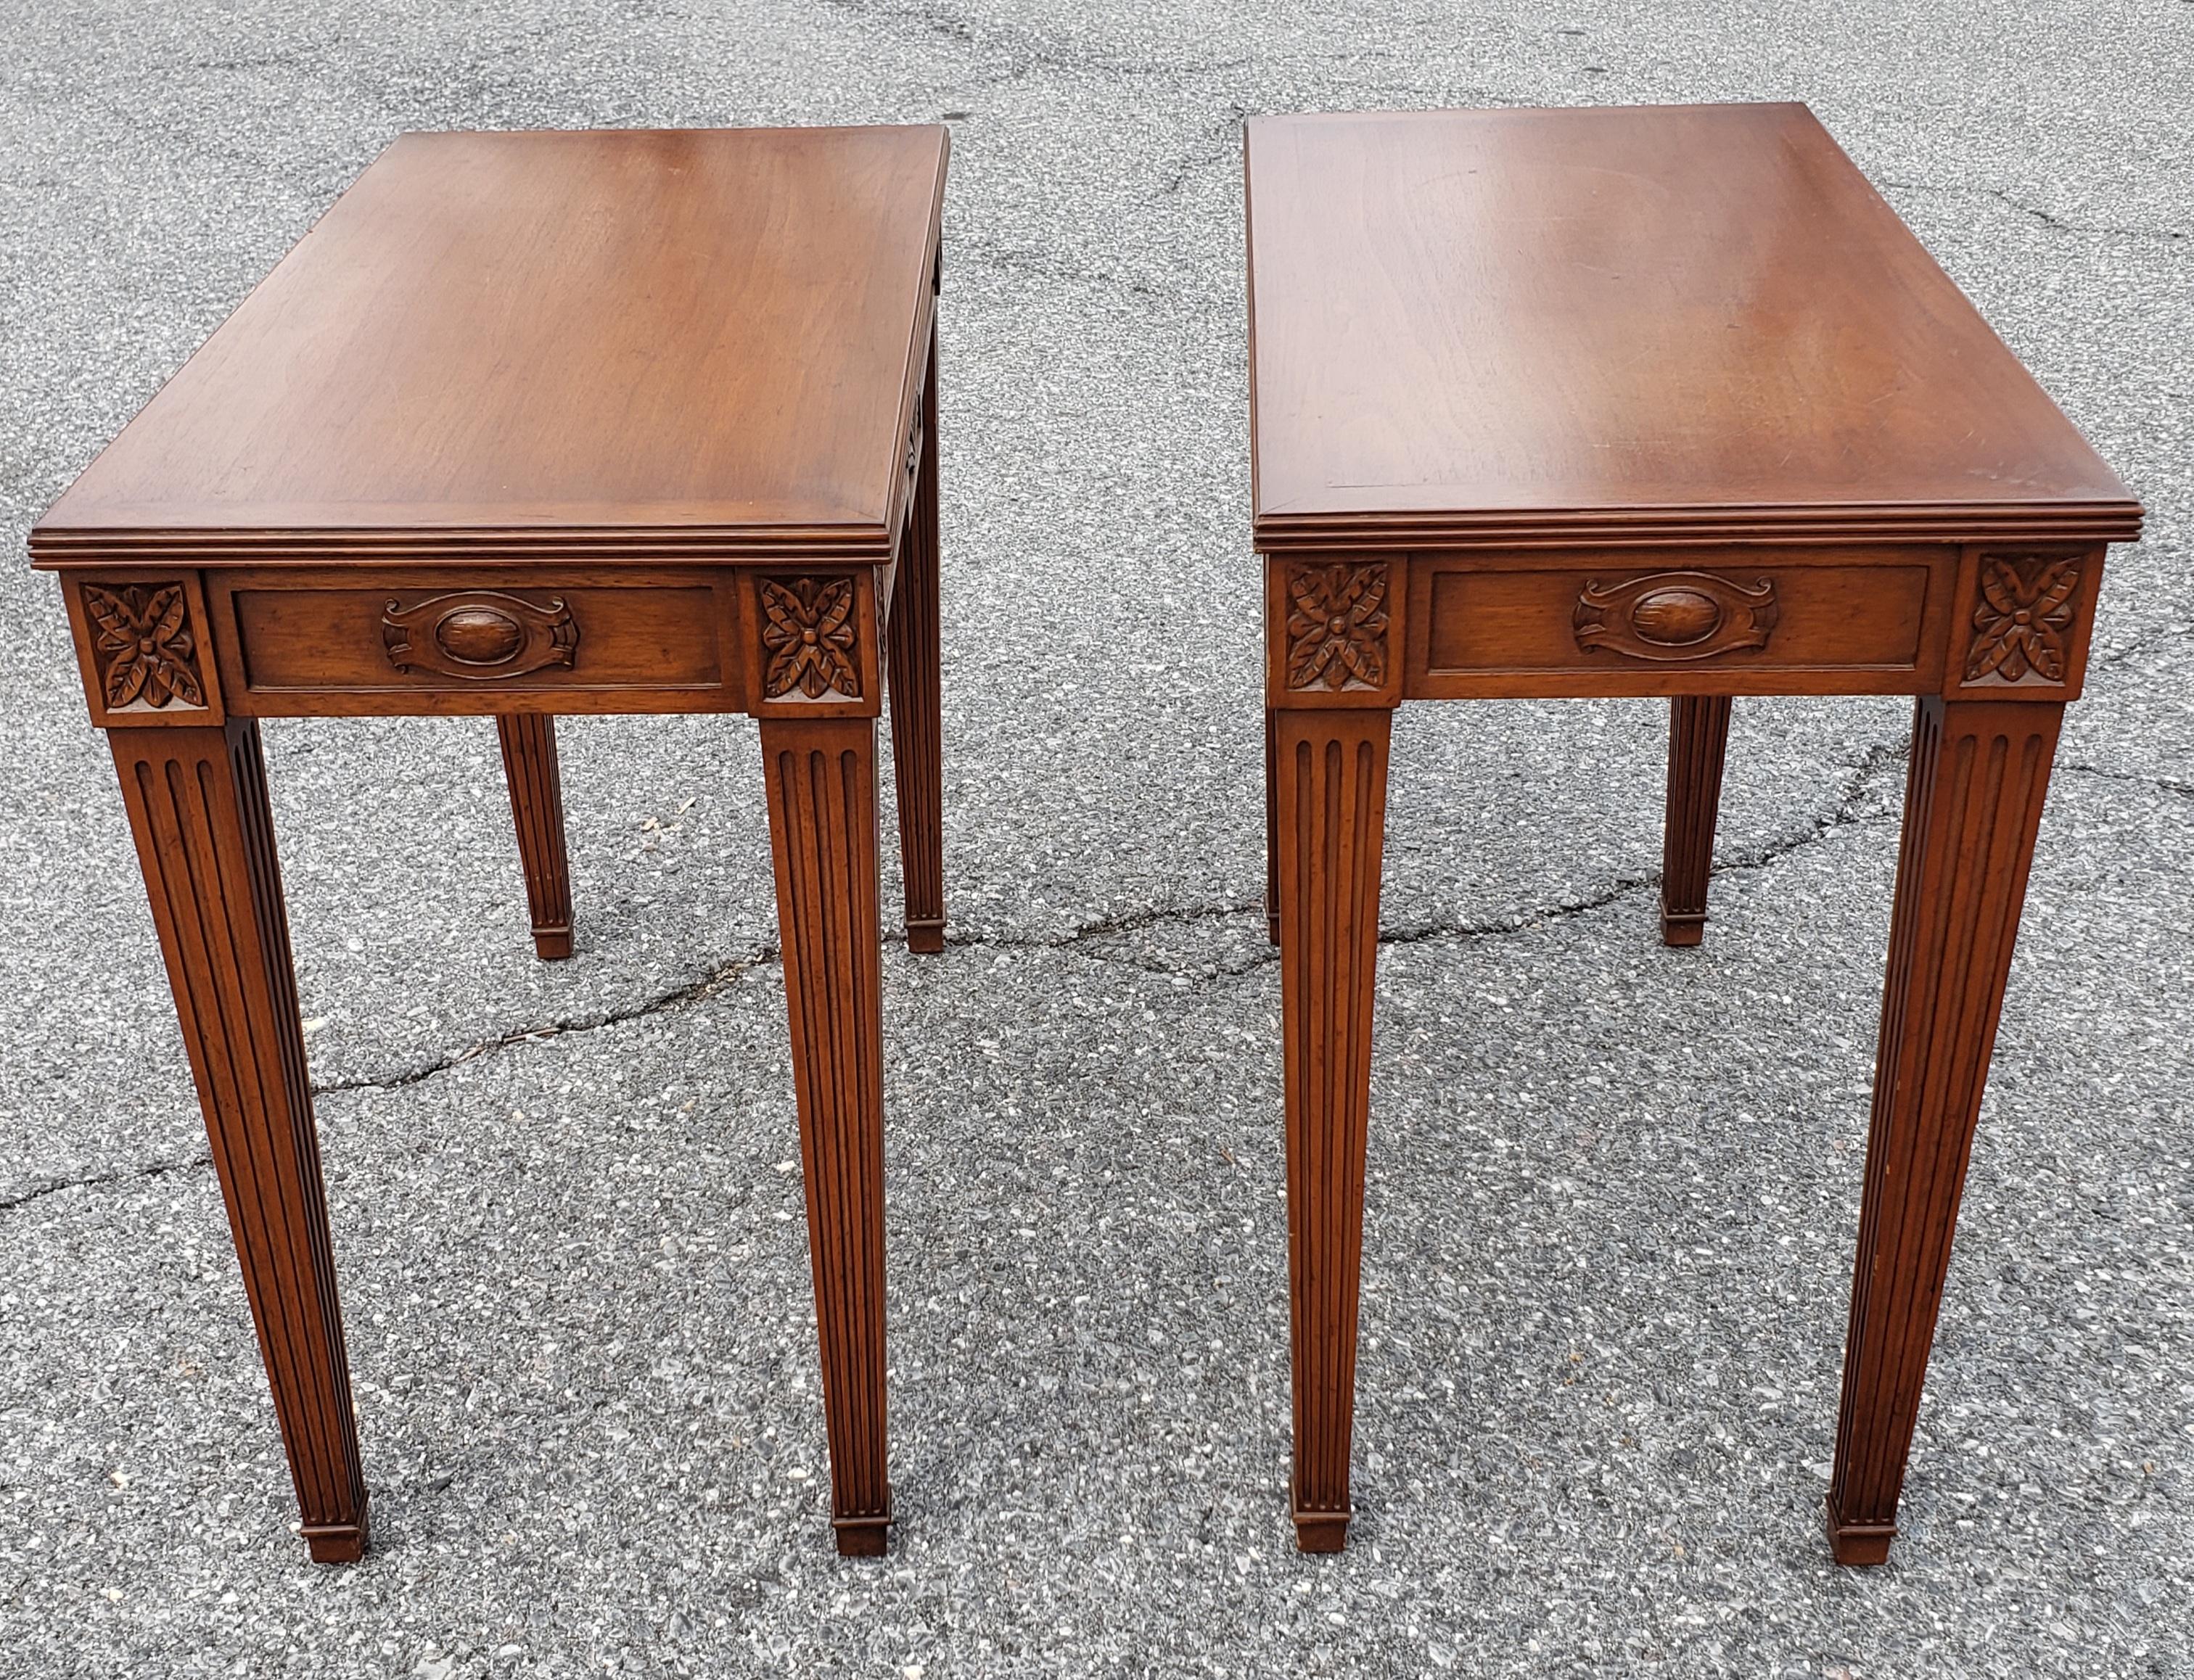 Pair of Maslow Freen Louis XVI Style Handcarved Carved Single Drawer Side Tables In Good Condition For Sale In Germantown, MD